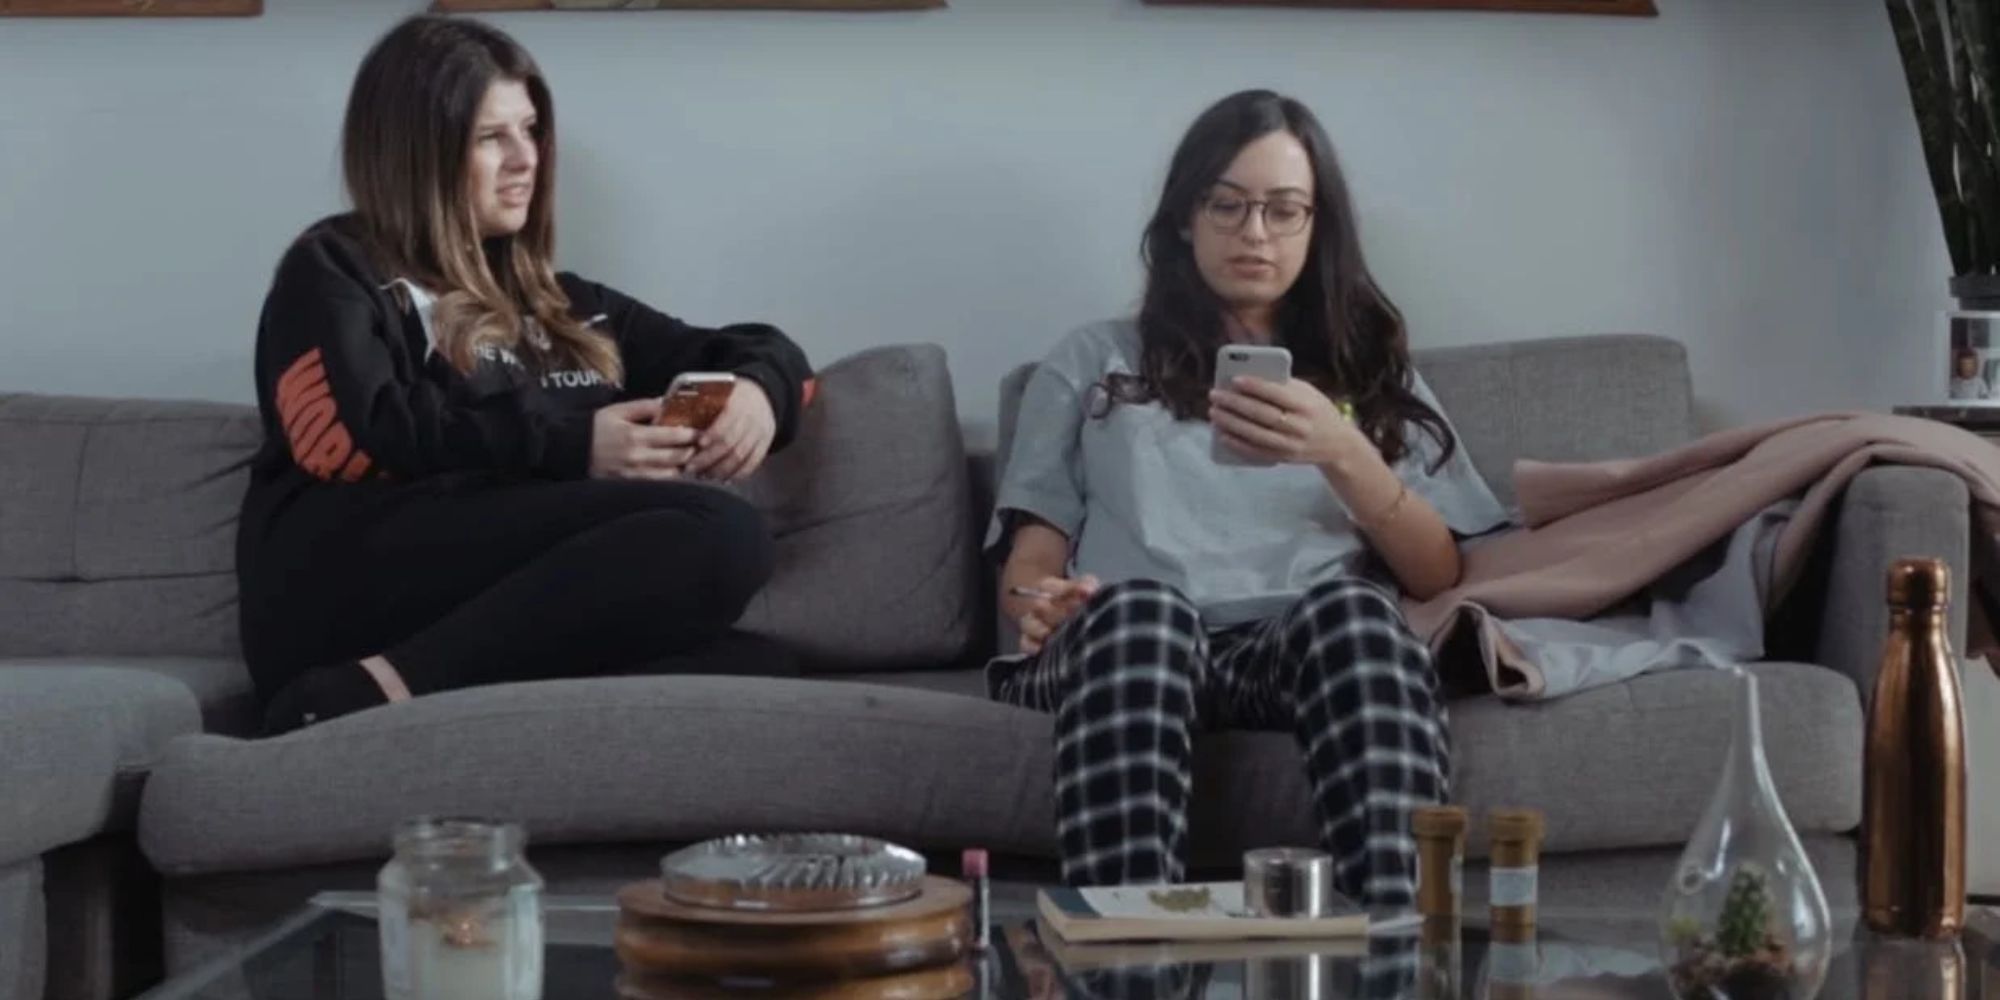 Two girls sitting on a couch, one with her phone and the other is facing the one with the phone